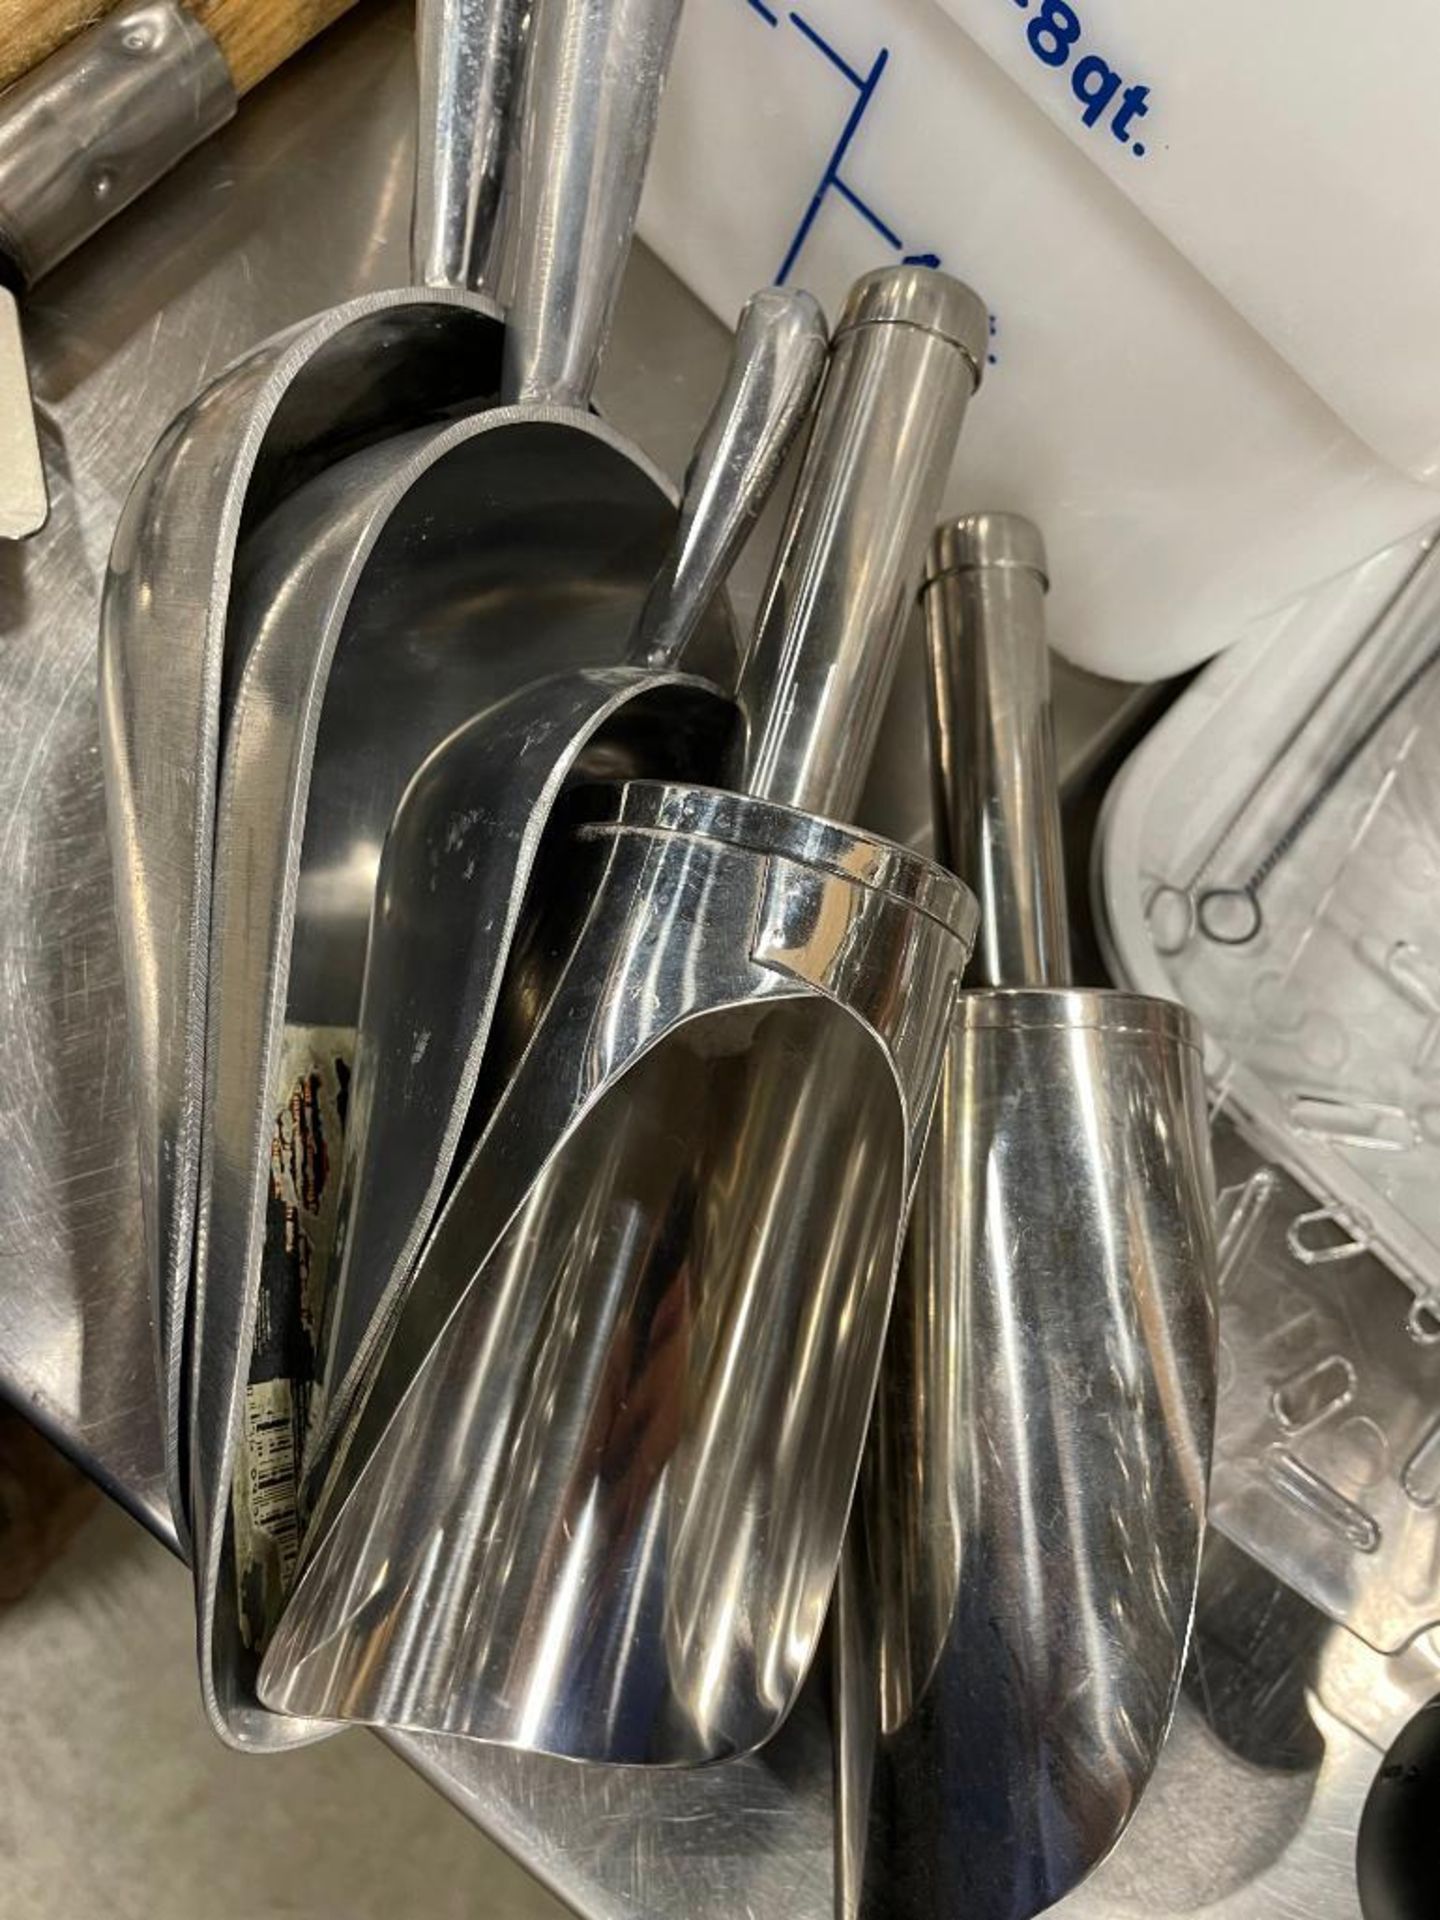 STAINLESS STEEL LADES, ICE SCOOPS, WIRE BRUSHES & FOOD STORAGE CONTAINER - Image 6 of 11